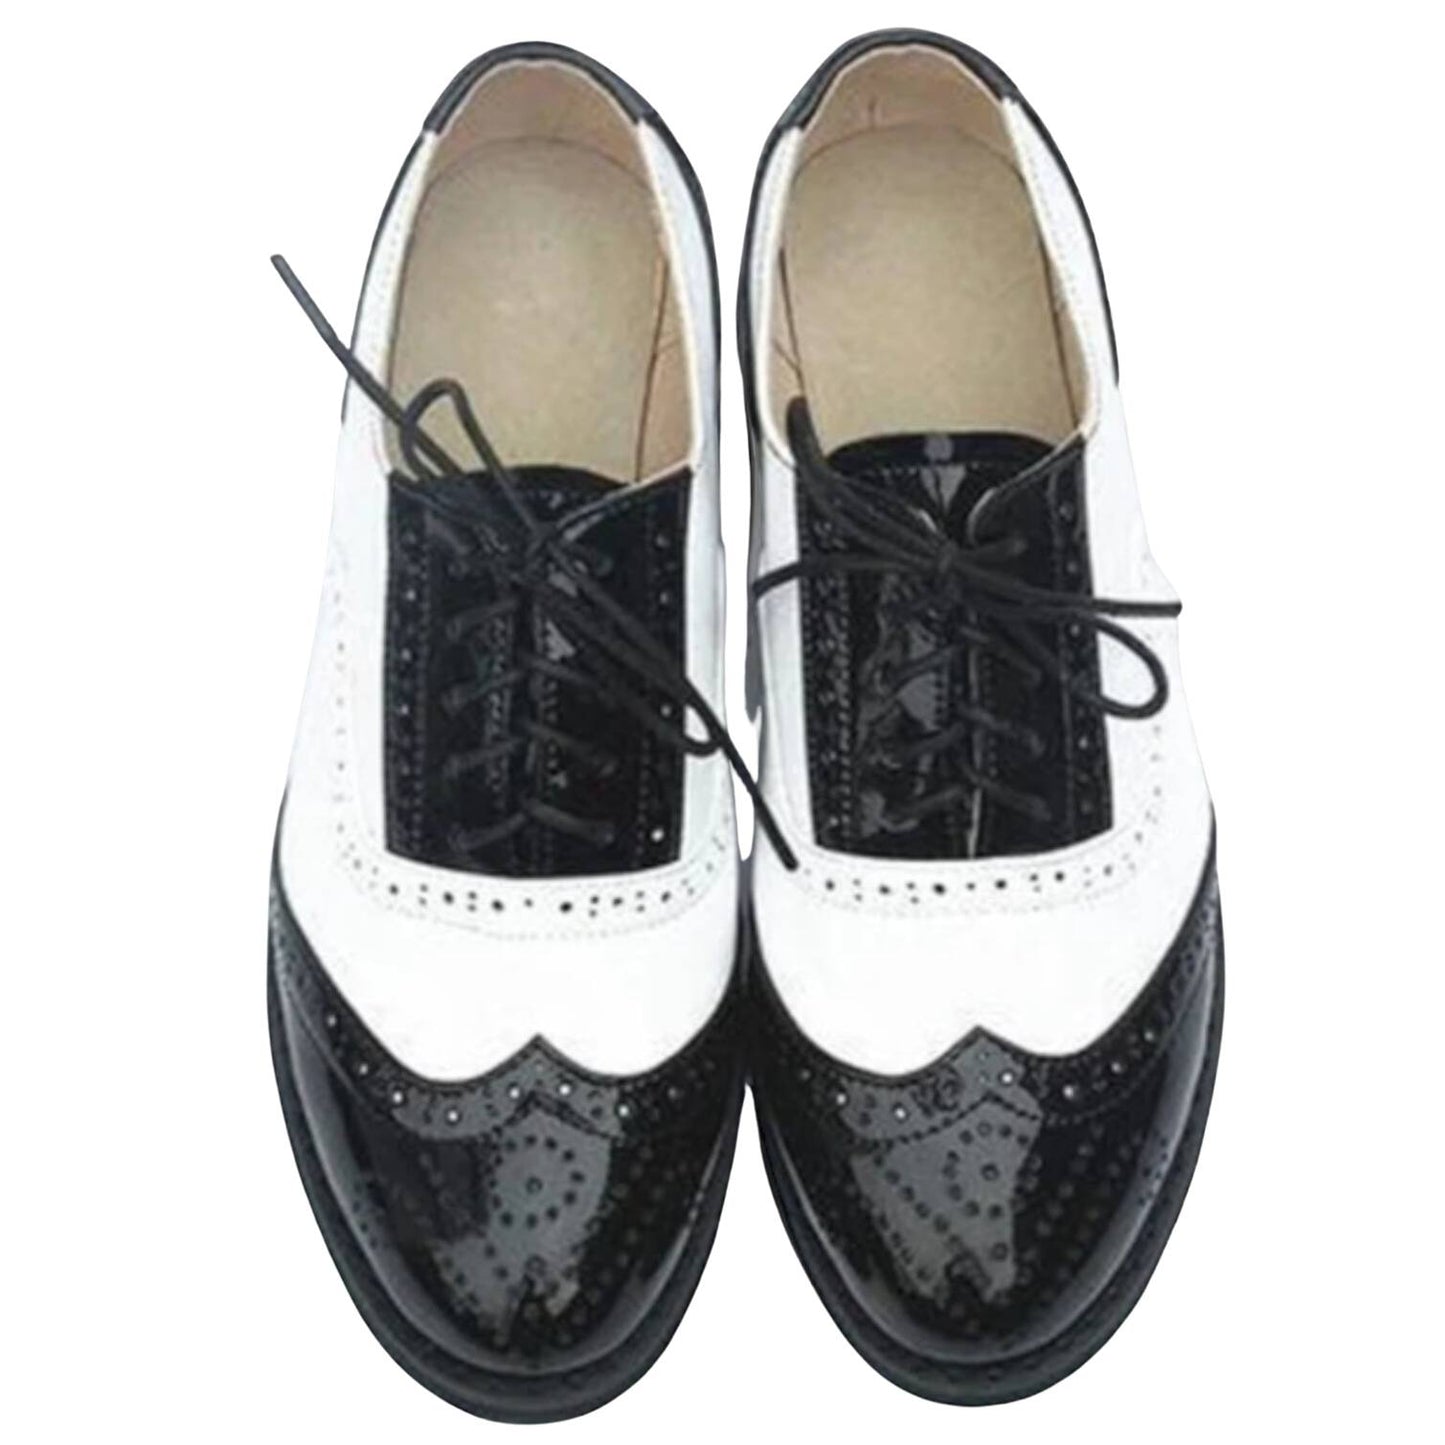 Oxford Shoes Vintage Handmade Genuine Leather For Women